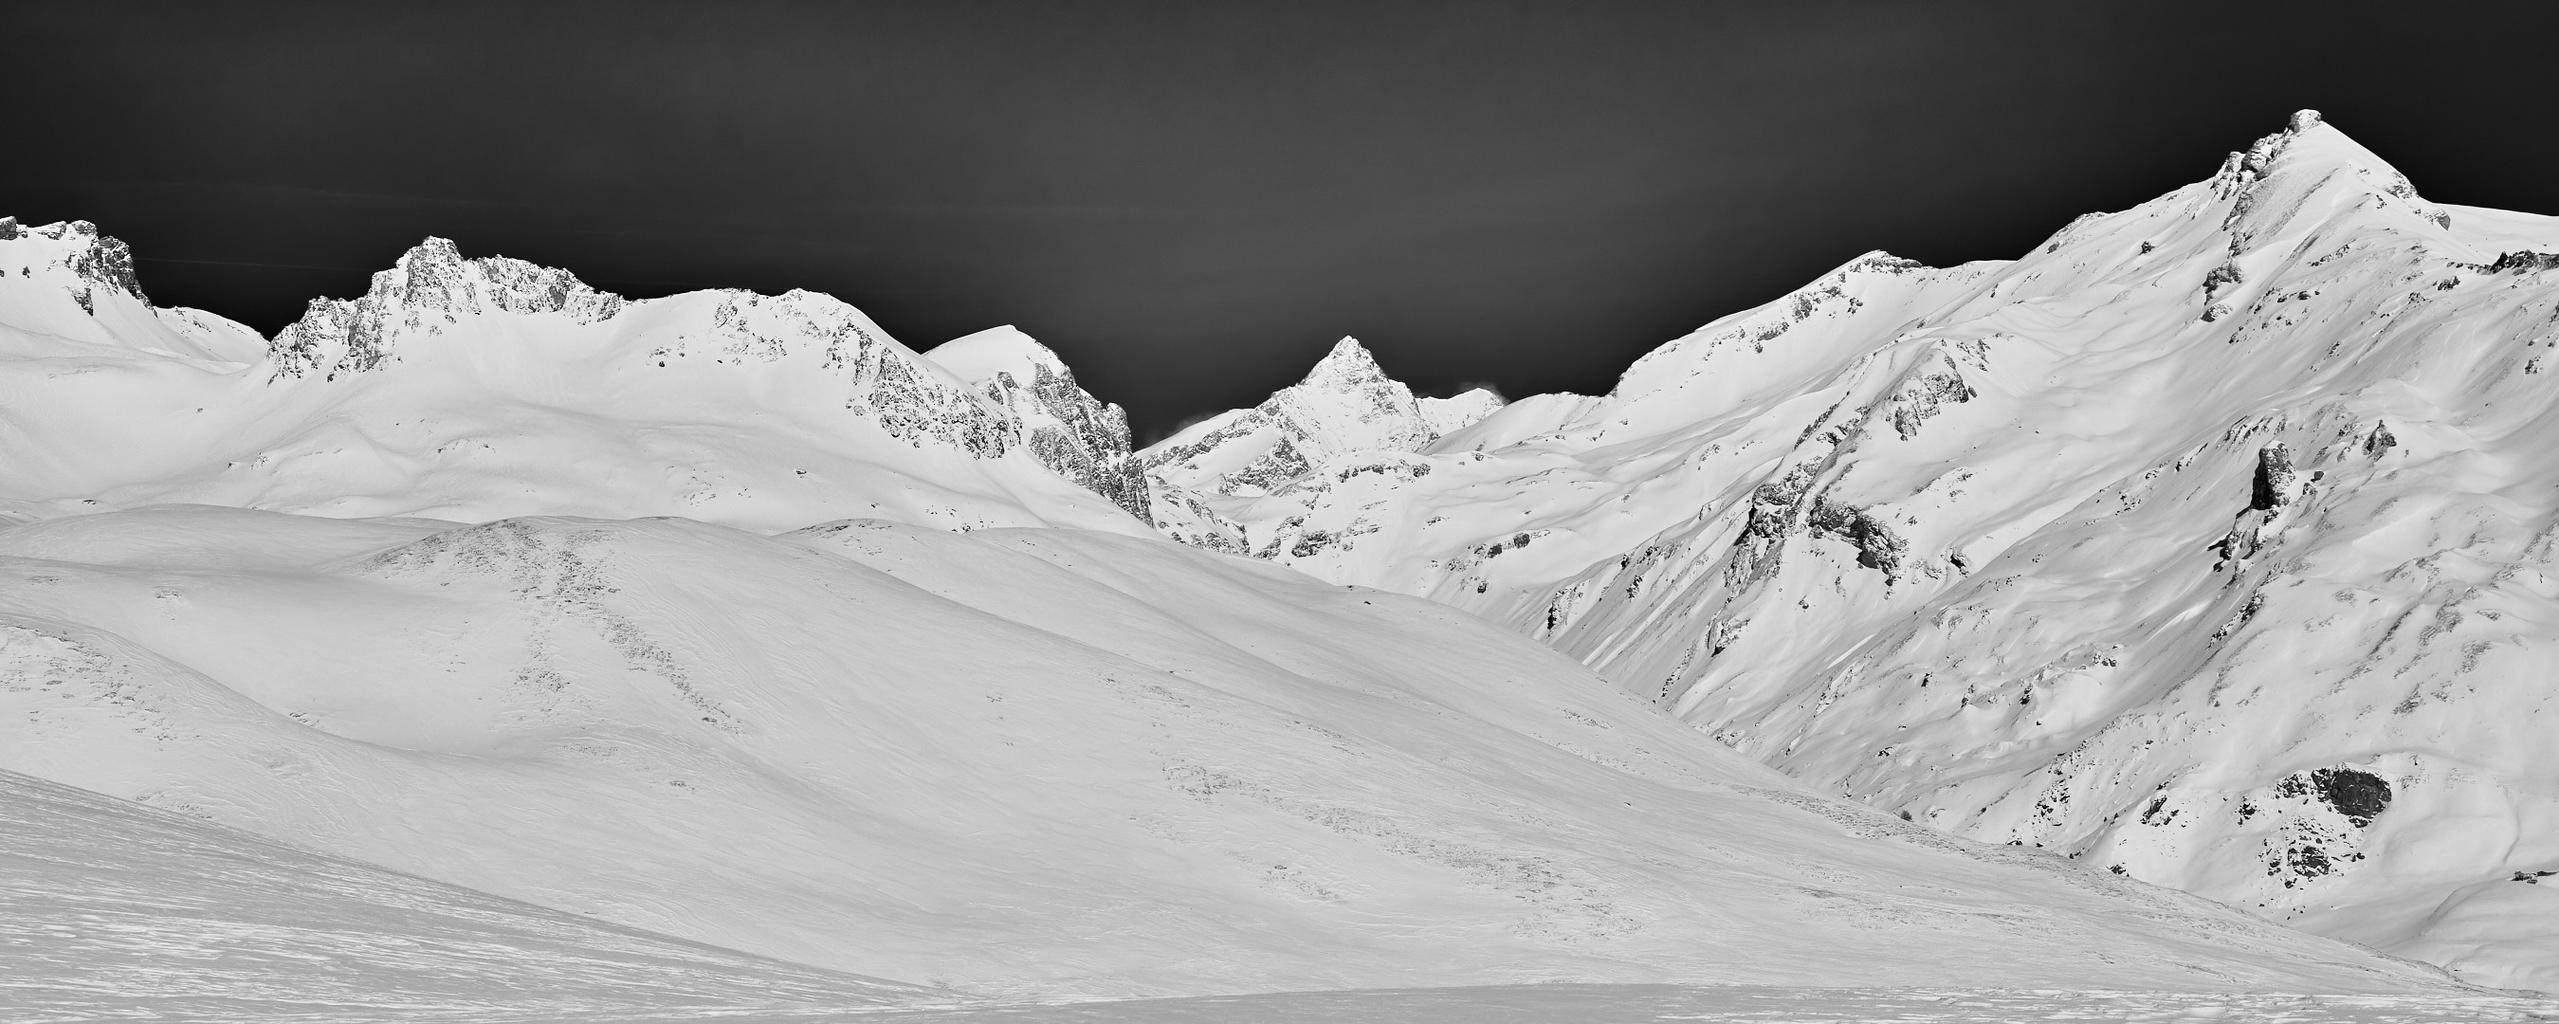 Black and white photo of French Alps